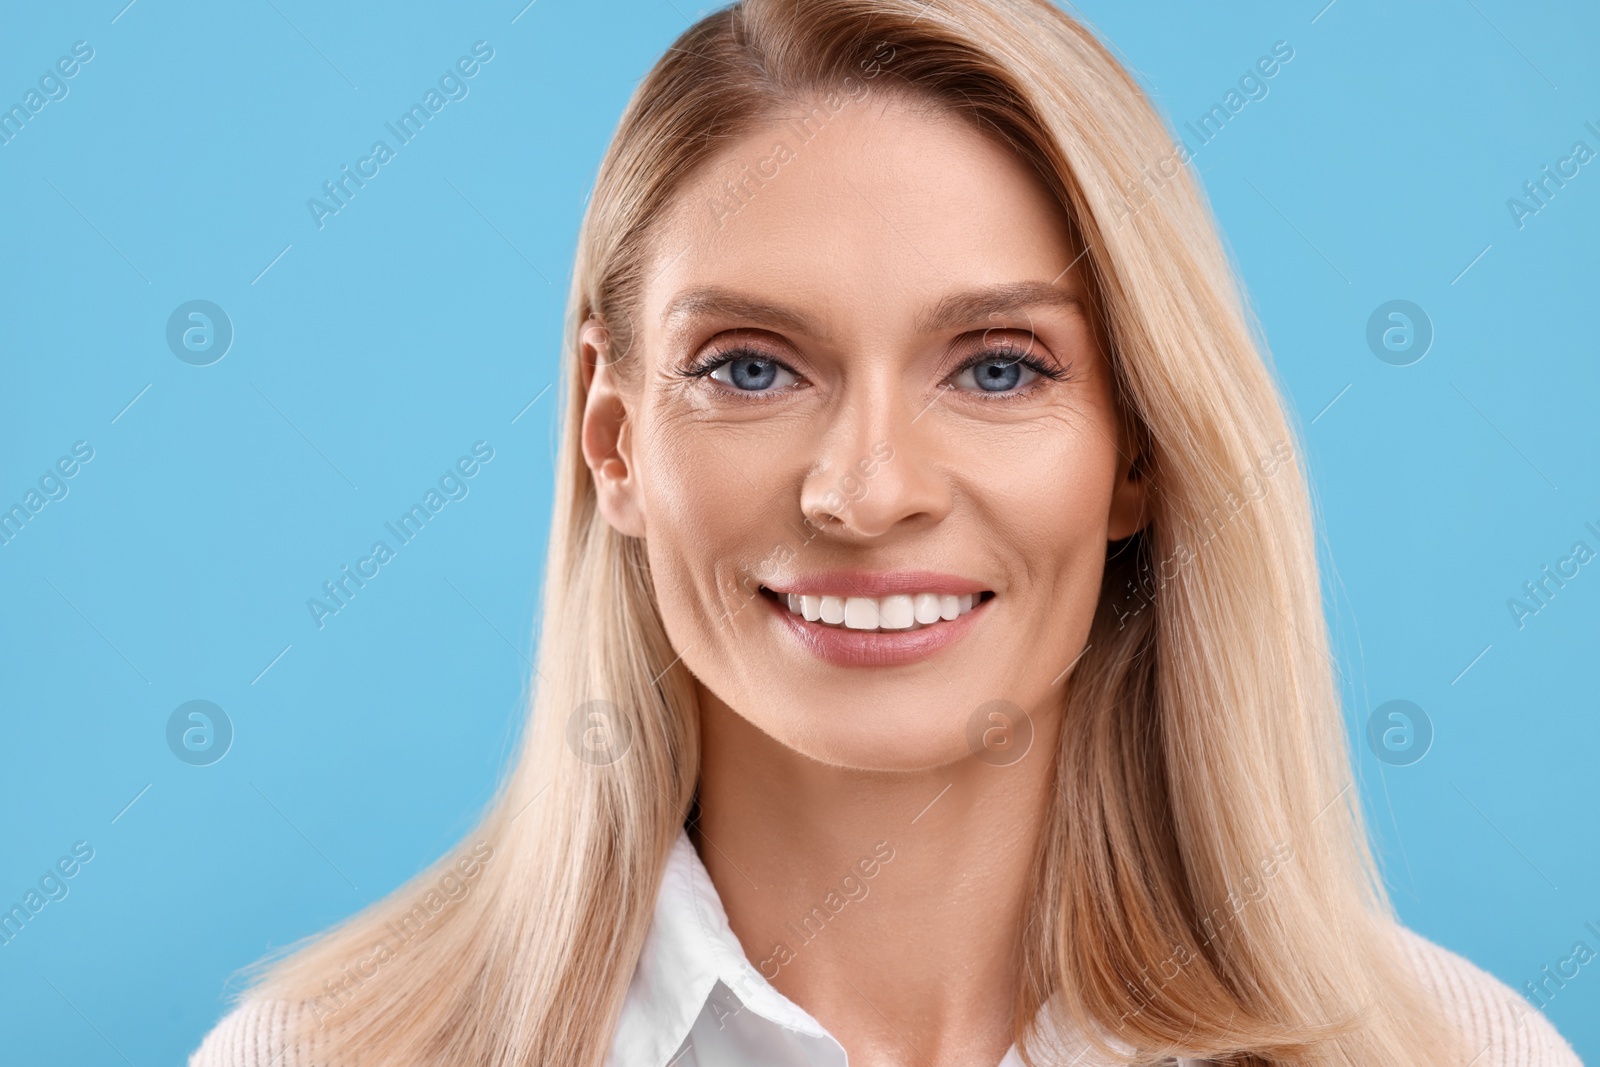 Photo of Portrait of smiling middle aged woman on light blue background